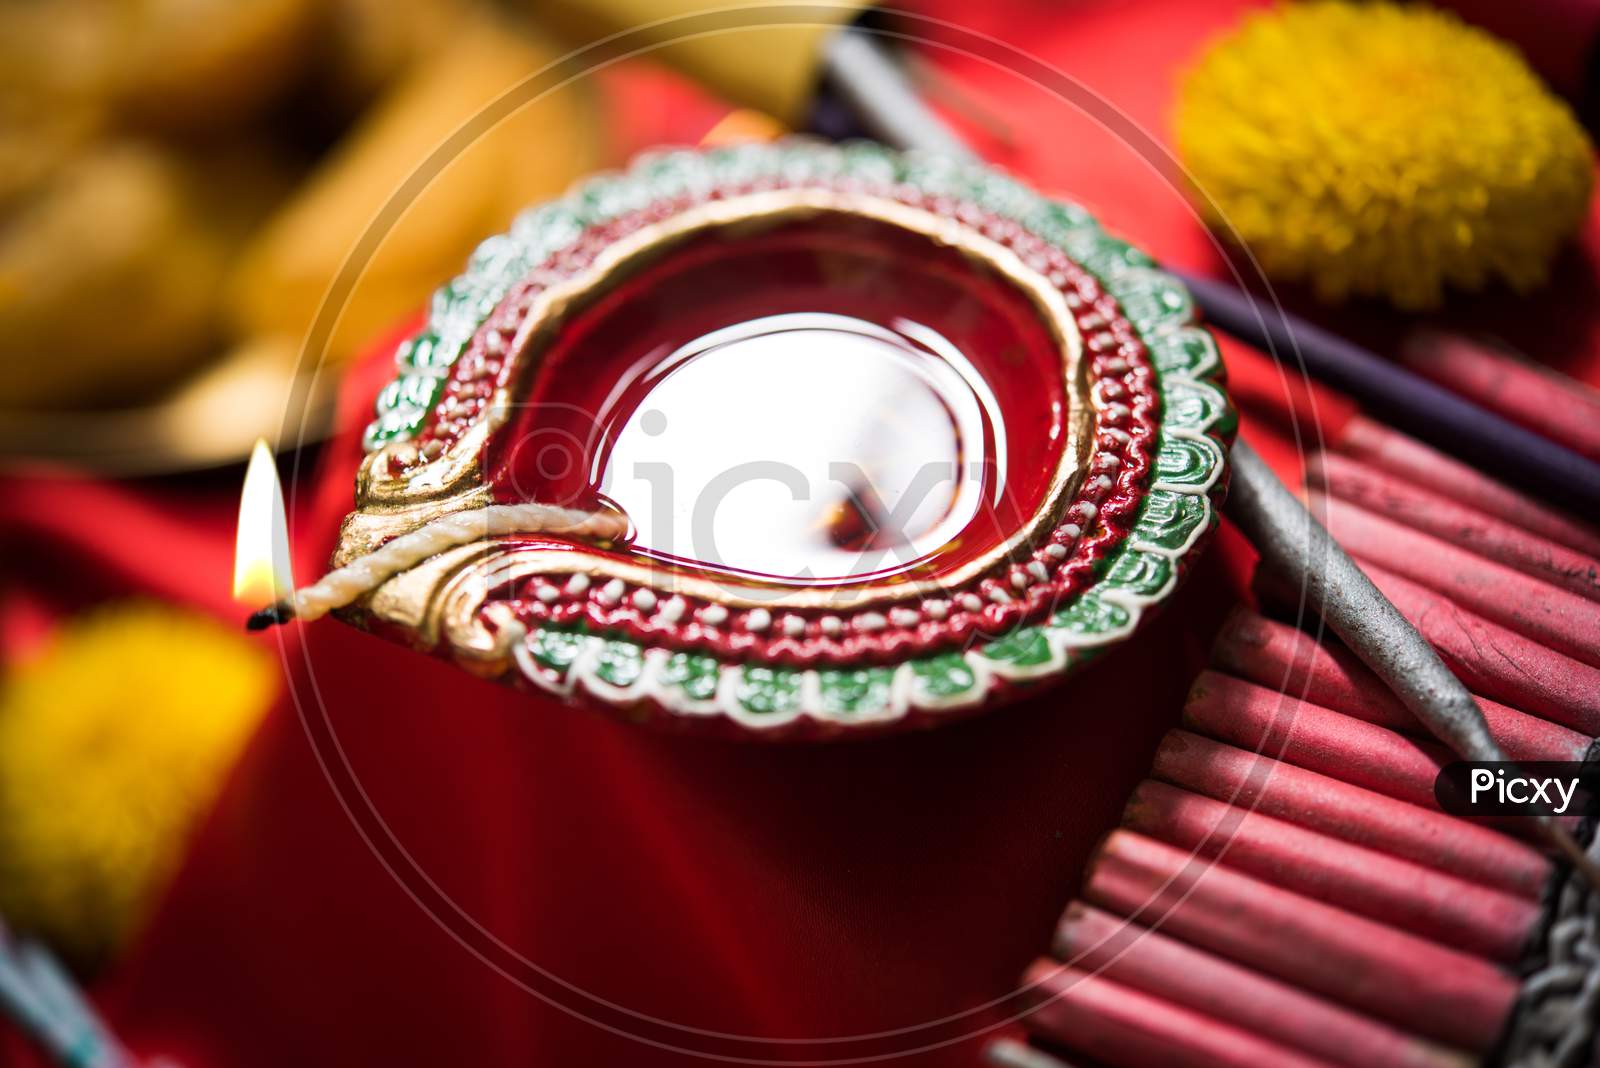 Diwali Diya, Sweets OR Mithai, Gift boxes and Crackers arranged over moody background